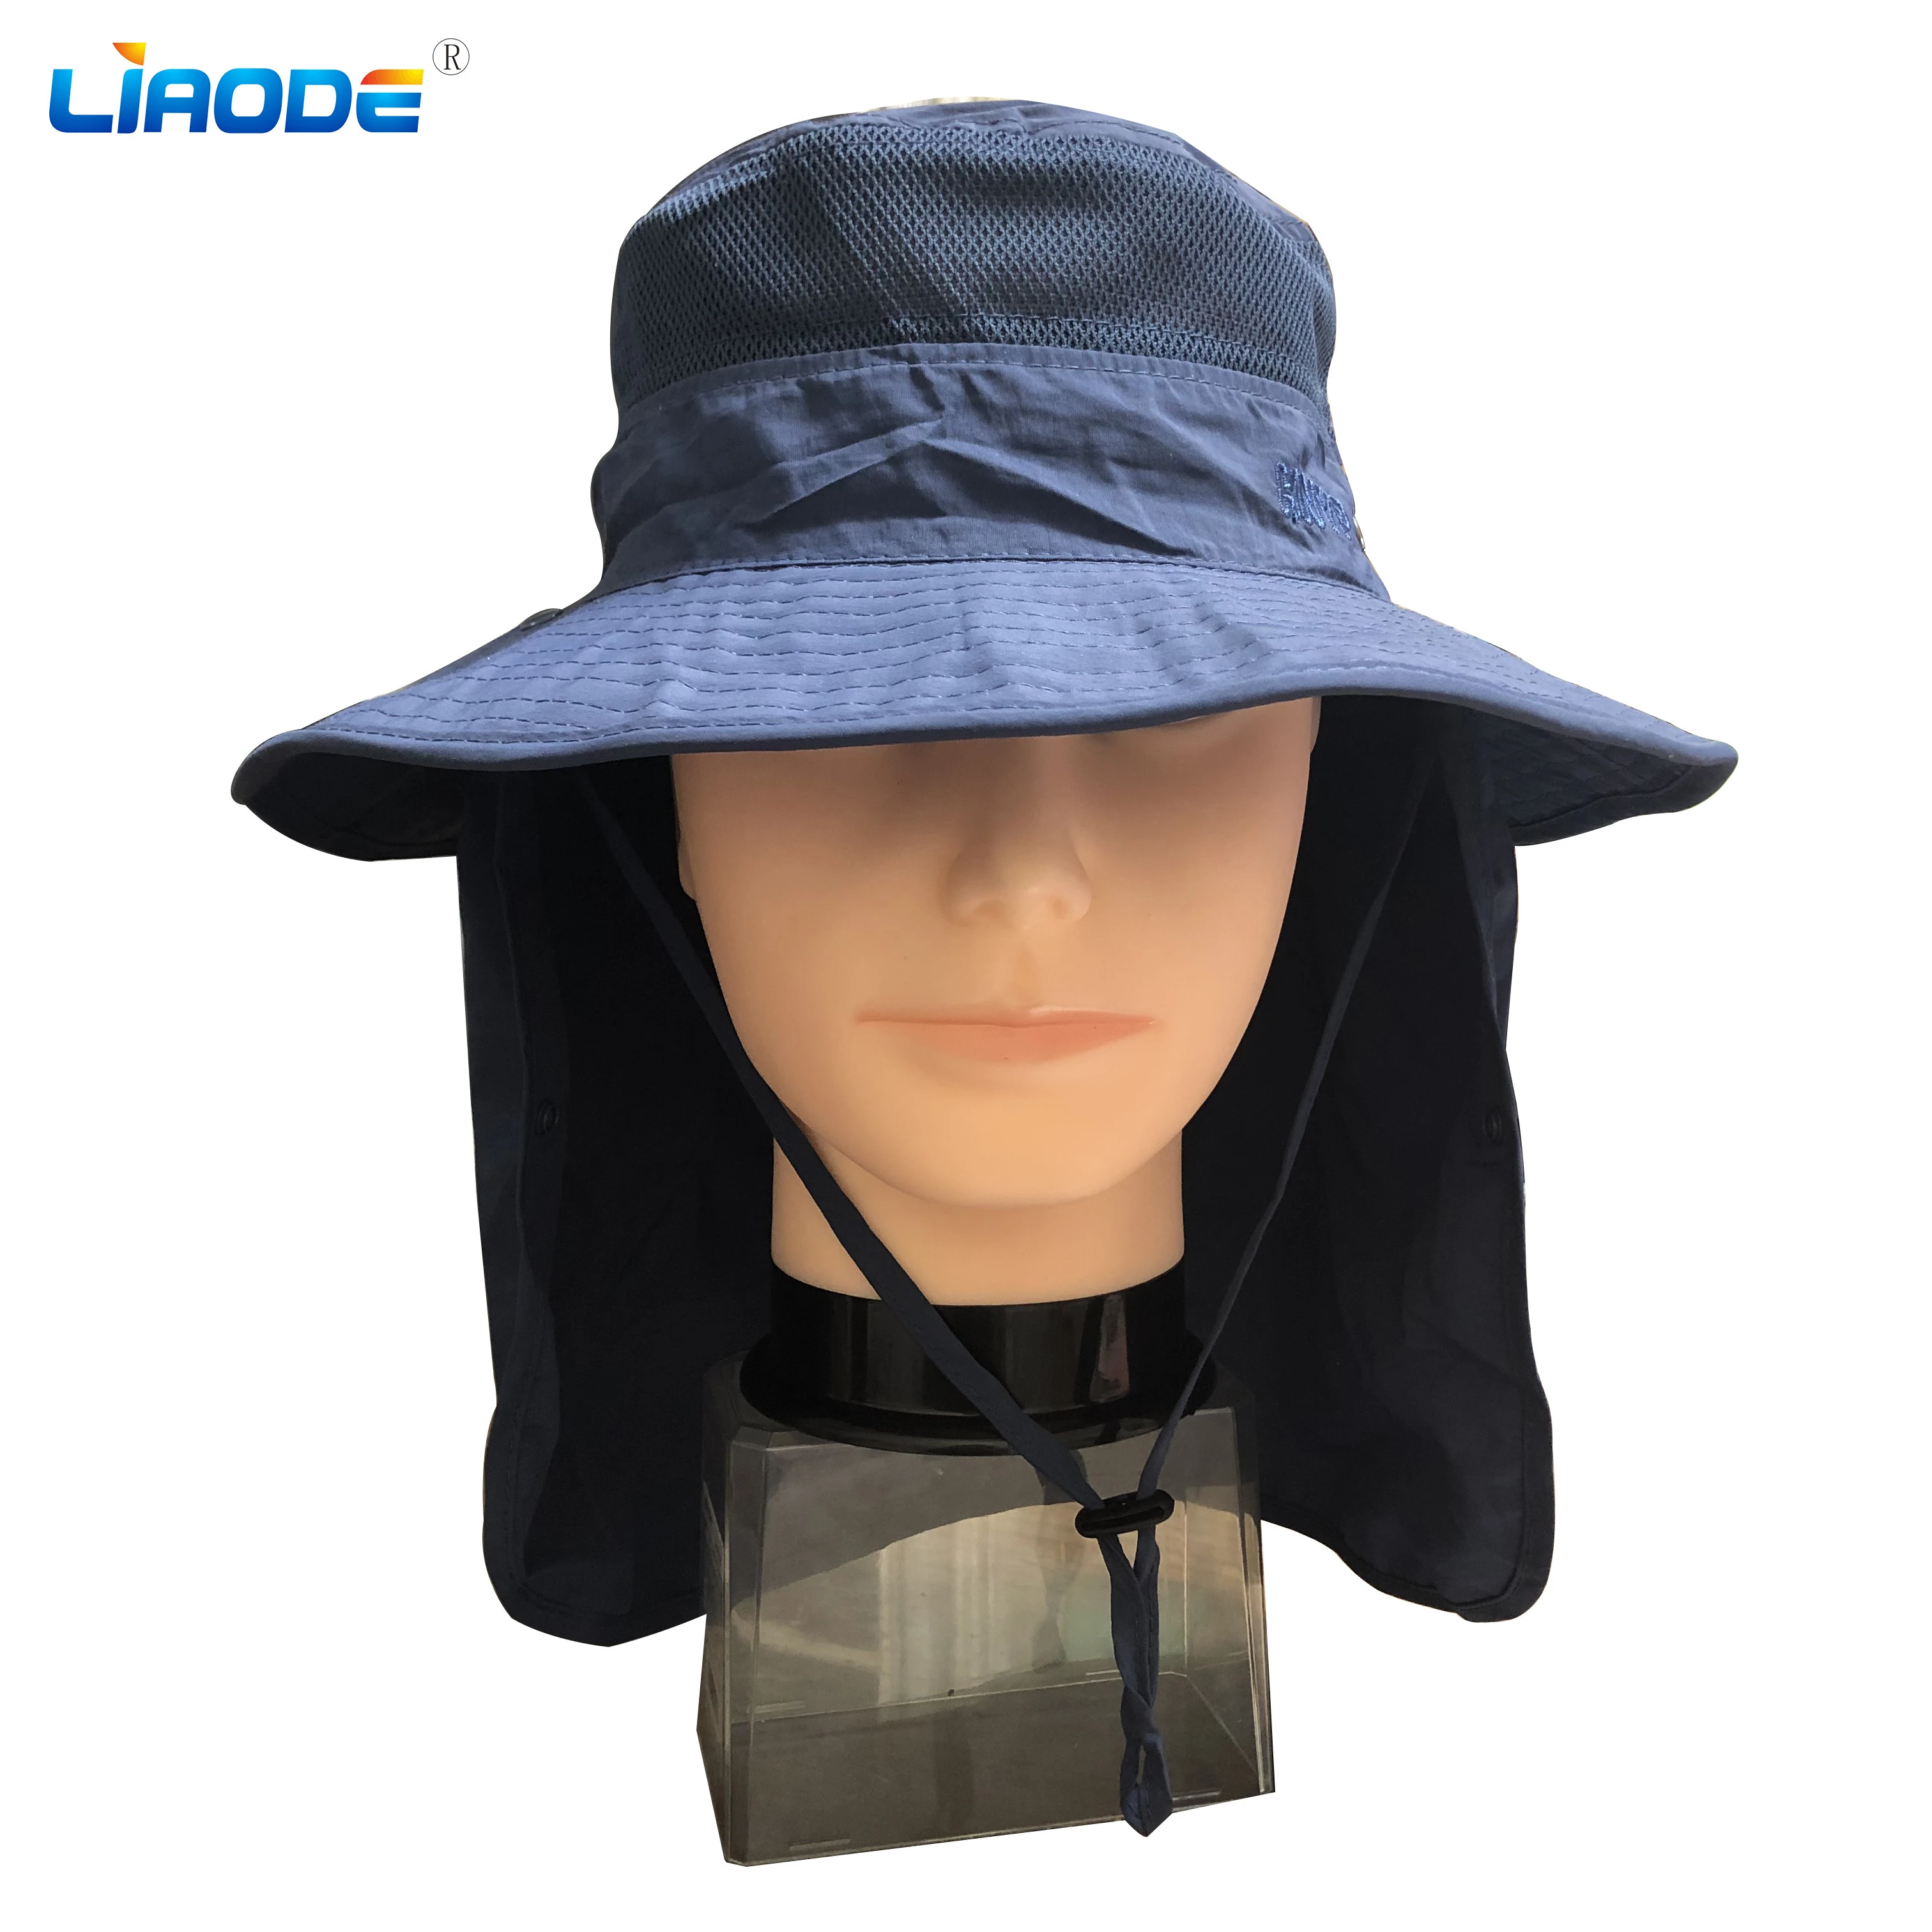 Hot sales custom logo100% polyester outdoor fishing hat cap bonnie hat wide brim with neck cover flap bucket hat